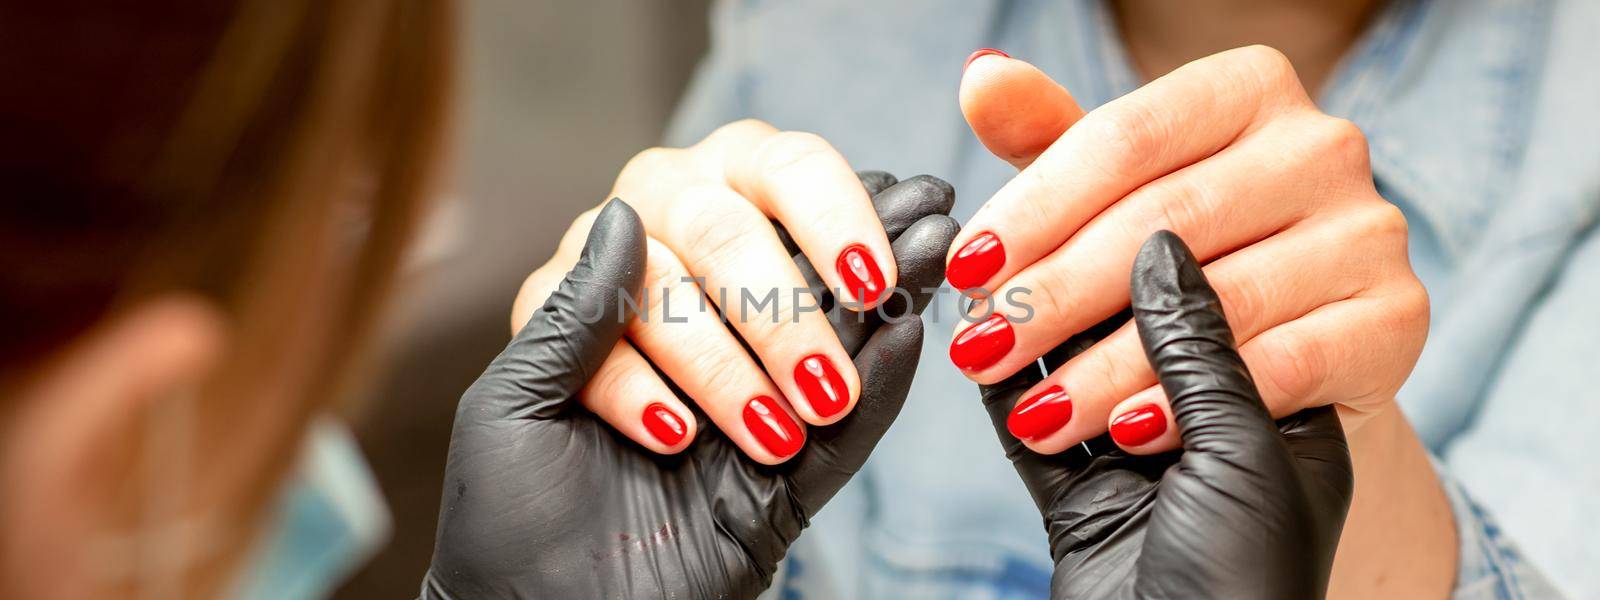 A manicurist holds beautiful young female hands showing finished red polish manicure in a nail salon